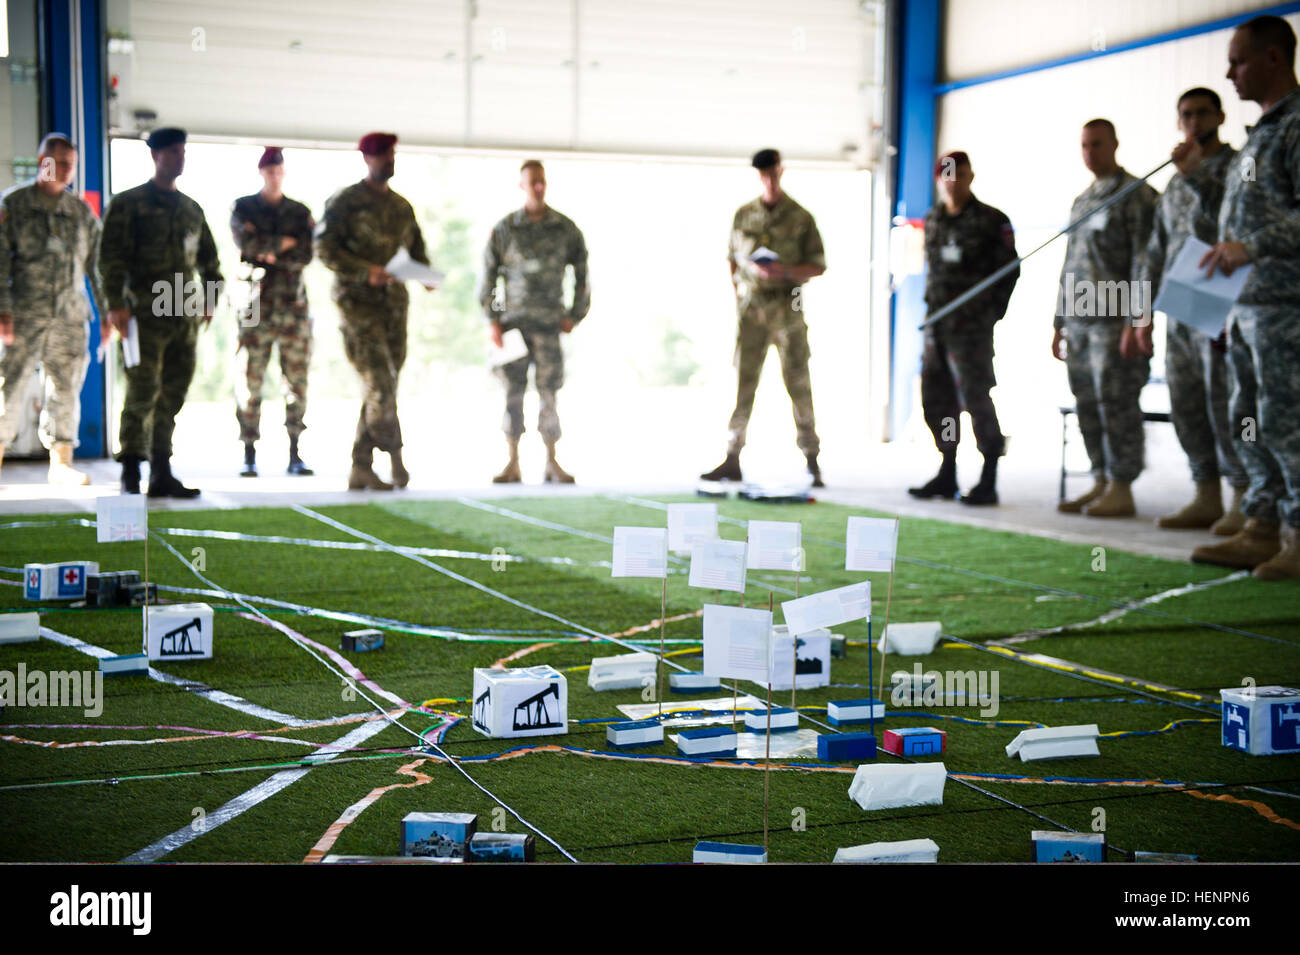 U.S. Soldiers and foreign service members gather around a large-scale sandtable to track troop movement on a simulated regional crisis map Aug. 25, 2014, in Postojna, Slovenia, during Immediate Response 14. Immediate Response is a U.S. Army Europe-led combined joint tactical field training exercise designed to build interoperability between NATO, Croatia and its regional partner nations. (U.S. Army photo by Staff Sgt. Caleb Barrieau/Released) U.S. Soldiers and foreign service members gather around a large-scale sandtable to track troop movement on a simulated regional crisis map Aug. 25, 2014, Stock Photo